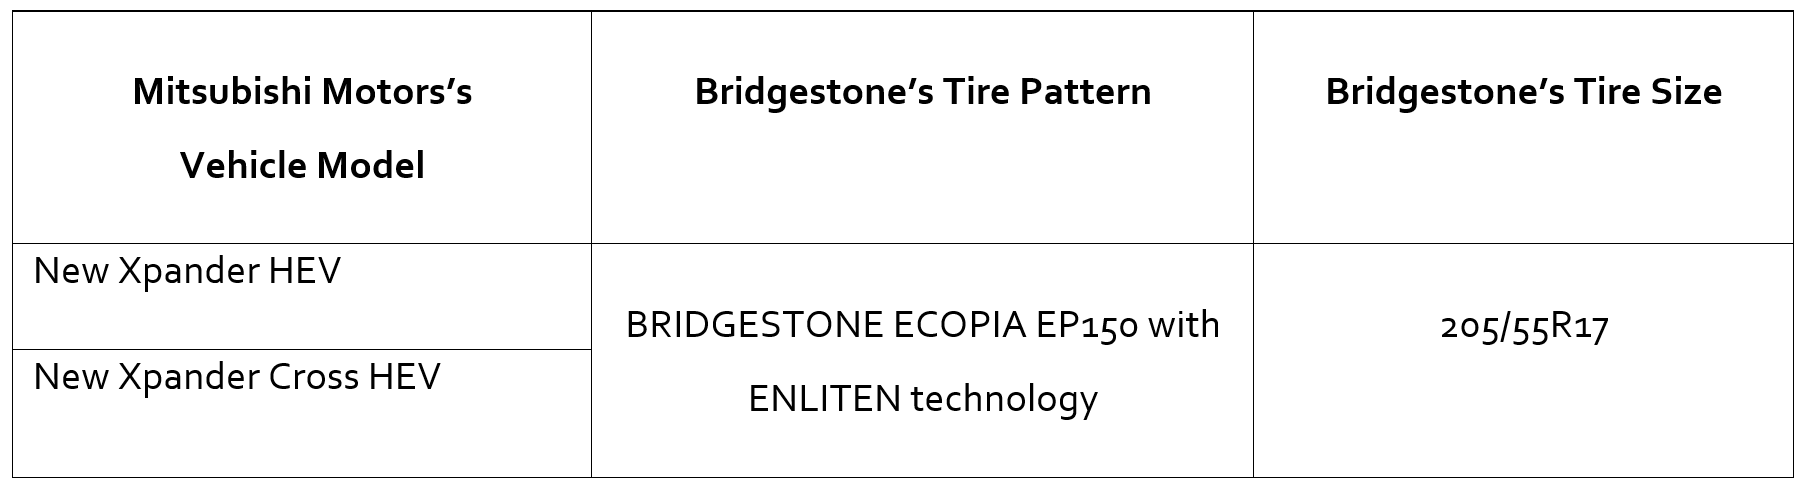 "BRIDGESTONE ECOPIA EP150 with the Ultimate Customization of Cutting-Edge ENLITEN(R) Technology" Selected as Original Equipment to Power "New Xpander HEV and New Xpander Cross HEV" from Mitsubishi Motors